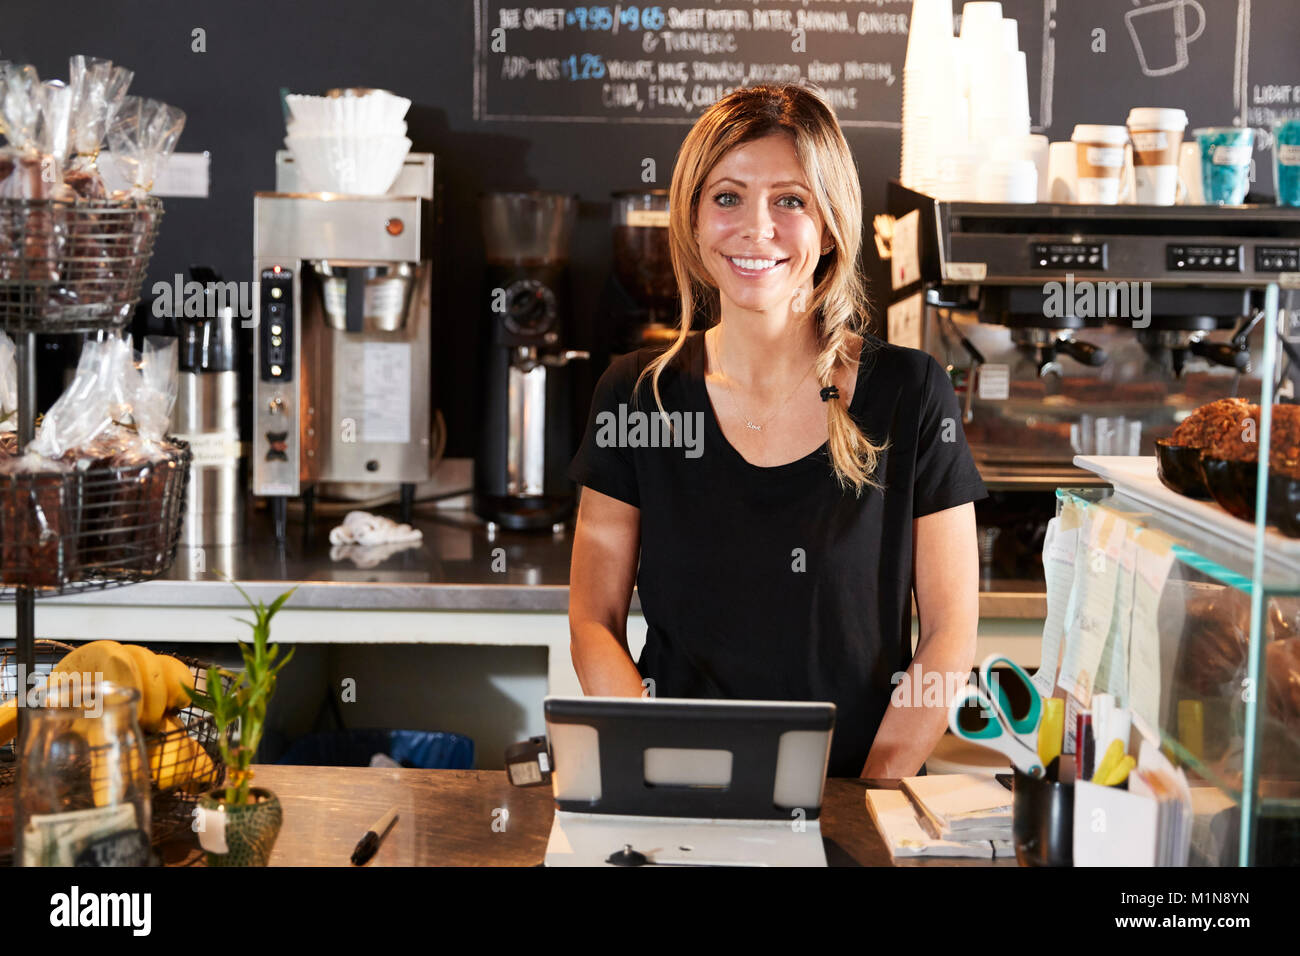 Portrait of Female Barista Behind Counter in Coffee Shop Banque D'Images